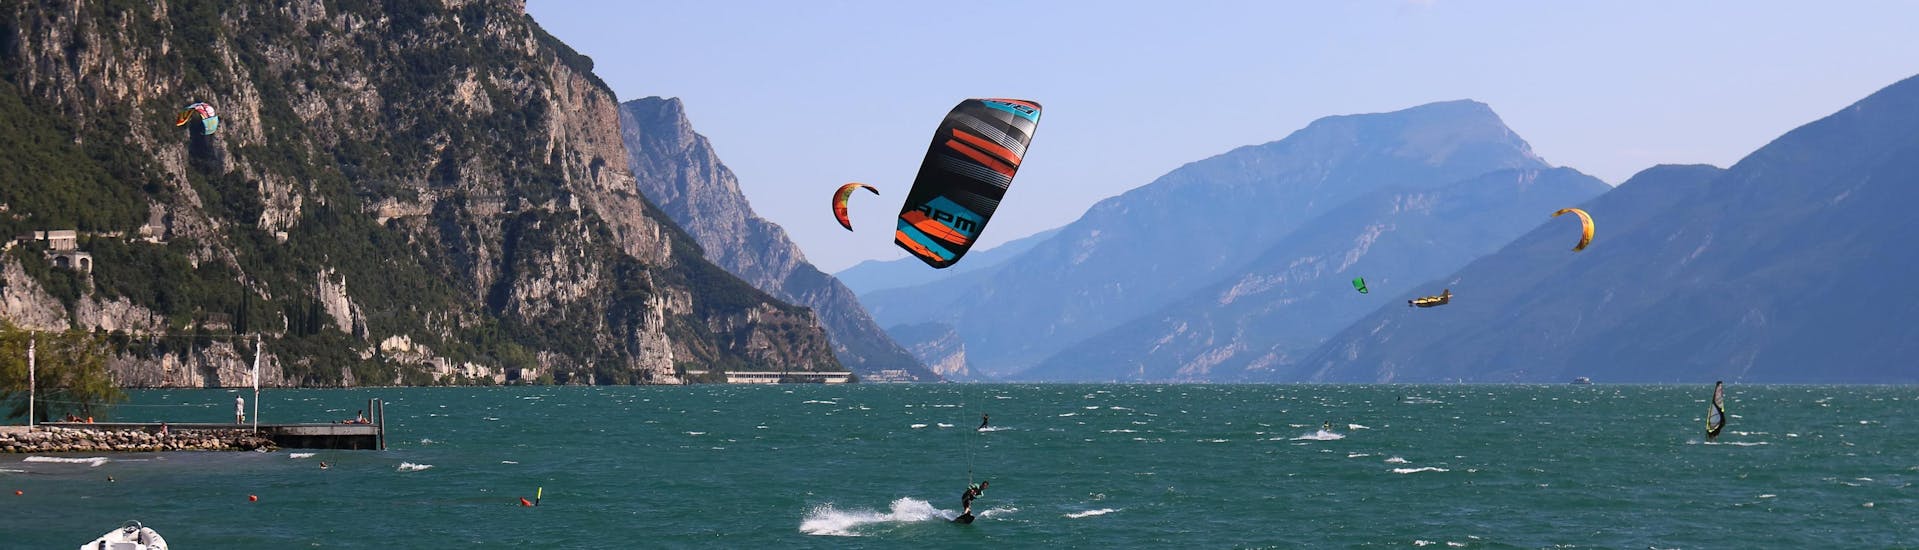 A young woman surfing in the clear blue waters of the surfing and SUP hotspot of Brenzone sul Garda.